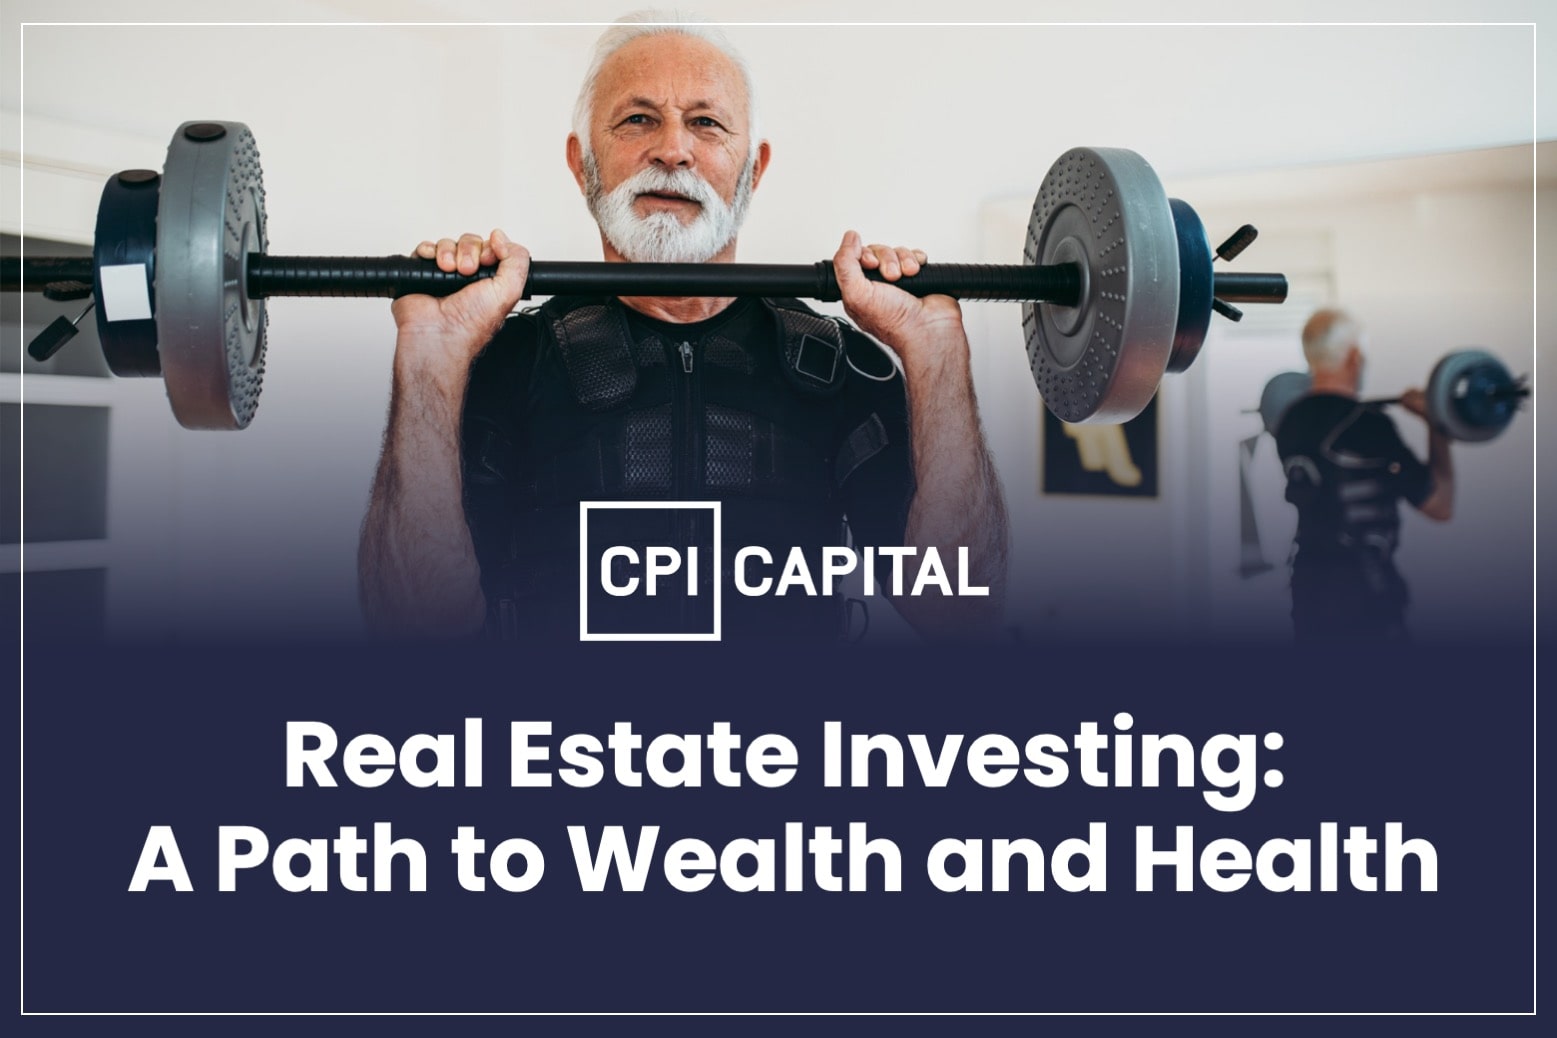 What is the Relationship between Health and Wealth in Terms of Real Estate investing?